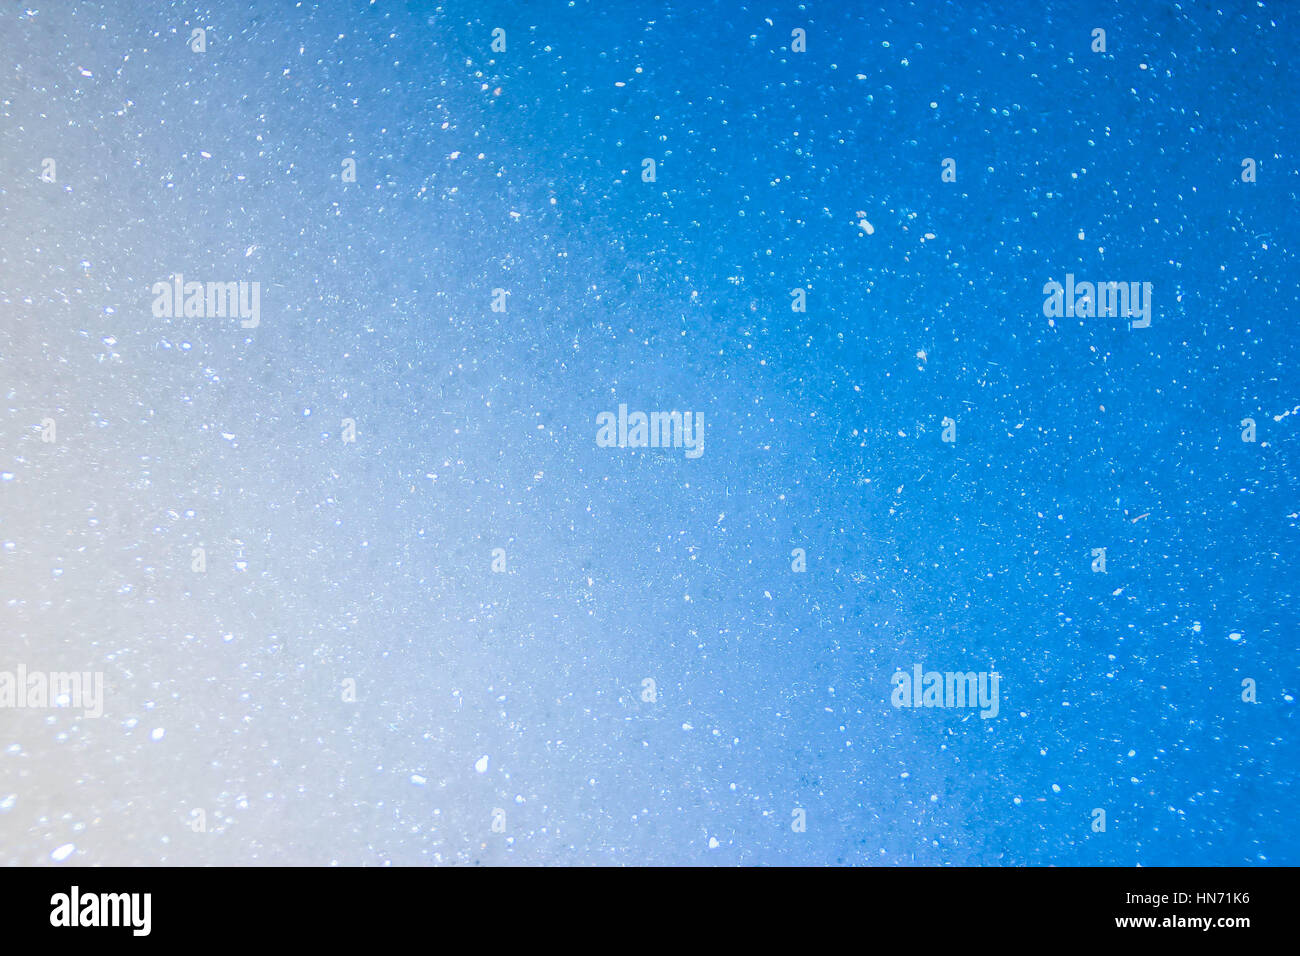 Shimmer background for commercial use presentations Stock Photo